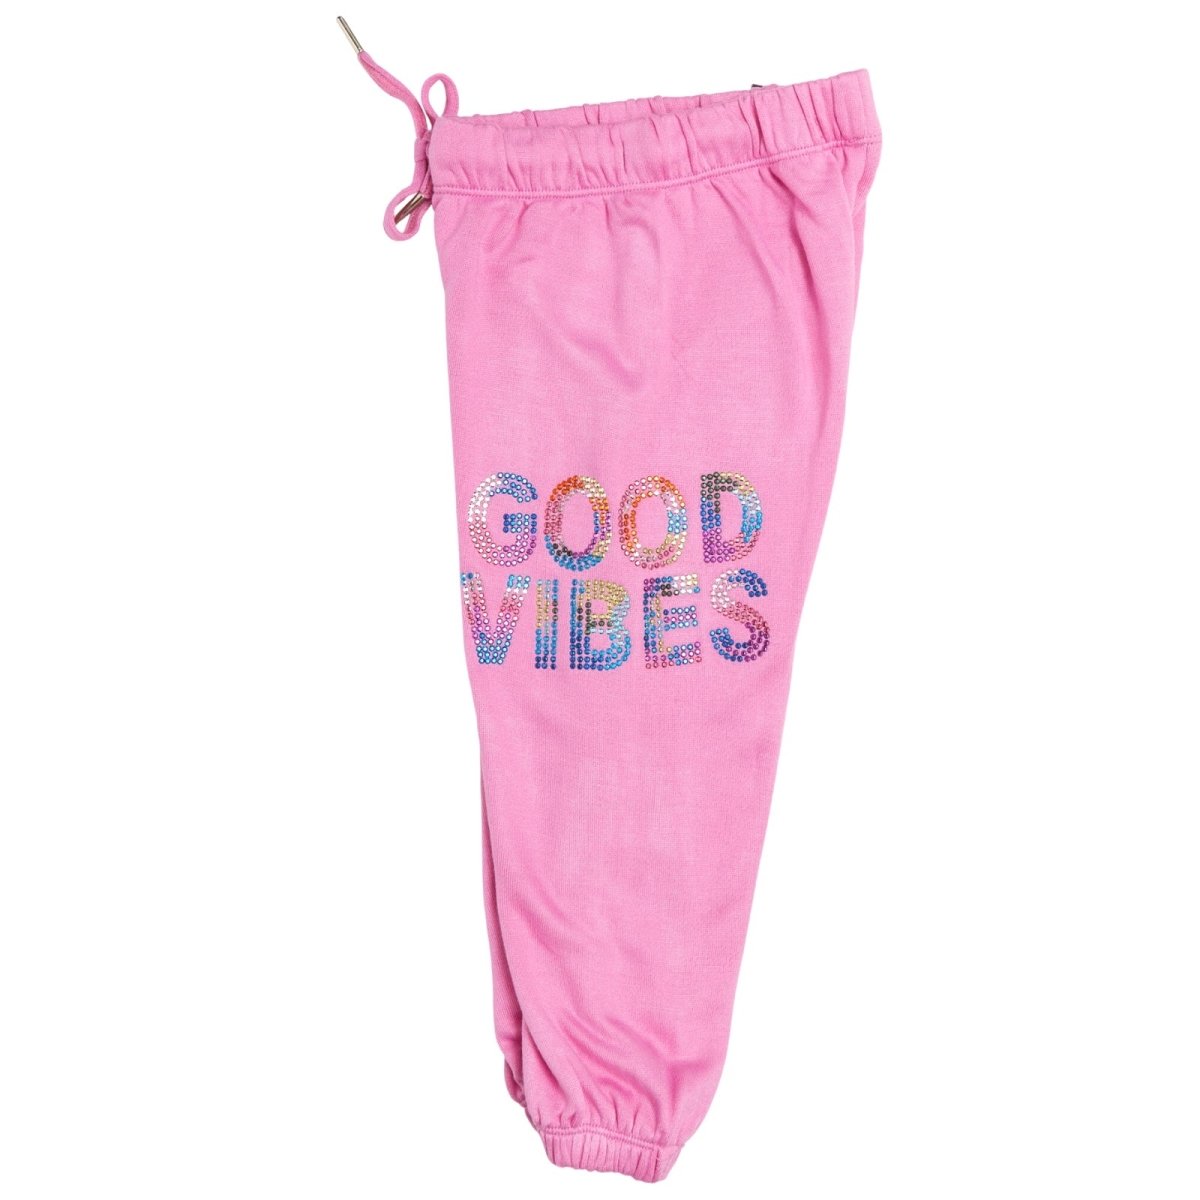 GOOD VIBES CRYSTAL SWEATPANTS - FLOWERS BY ZOE